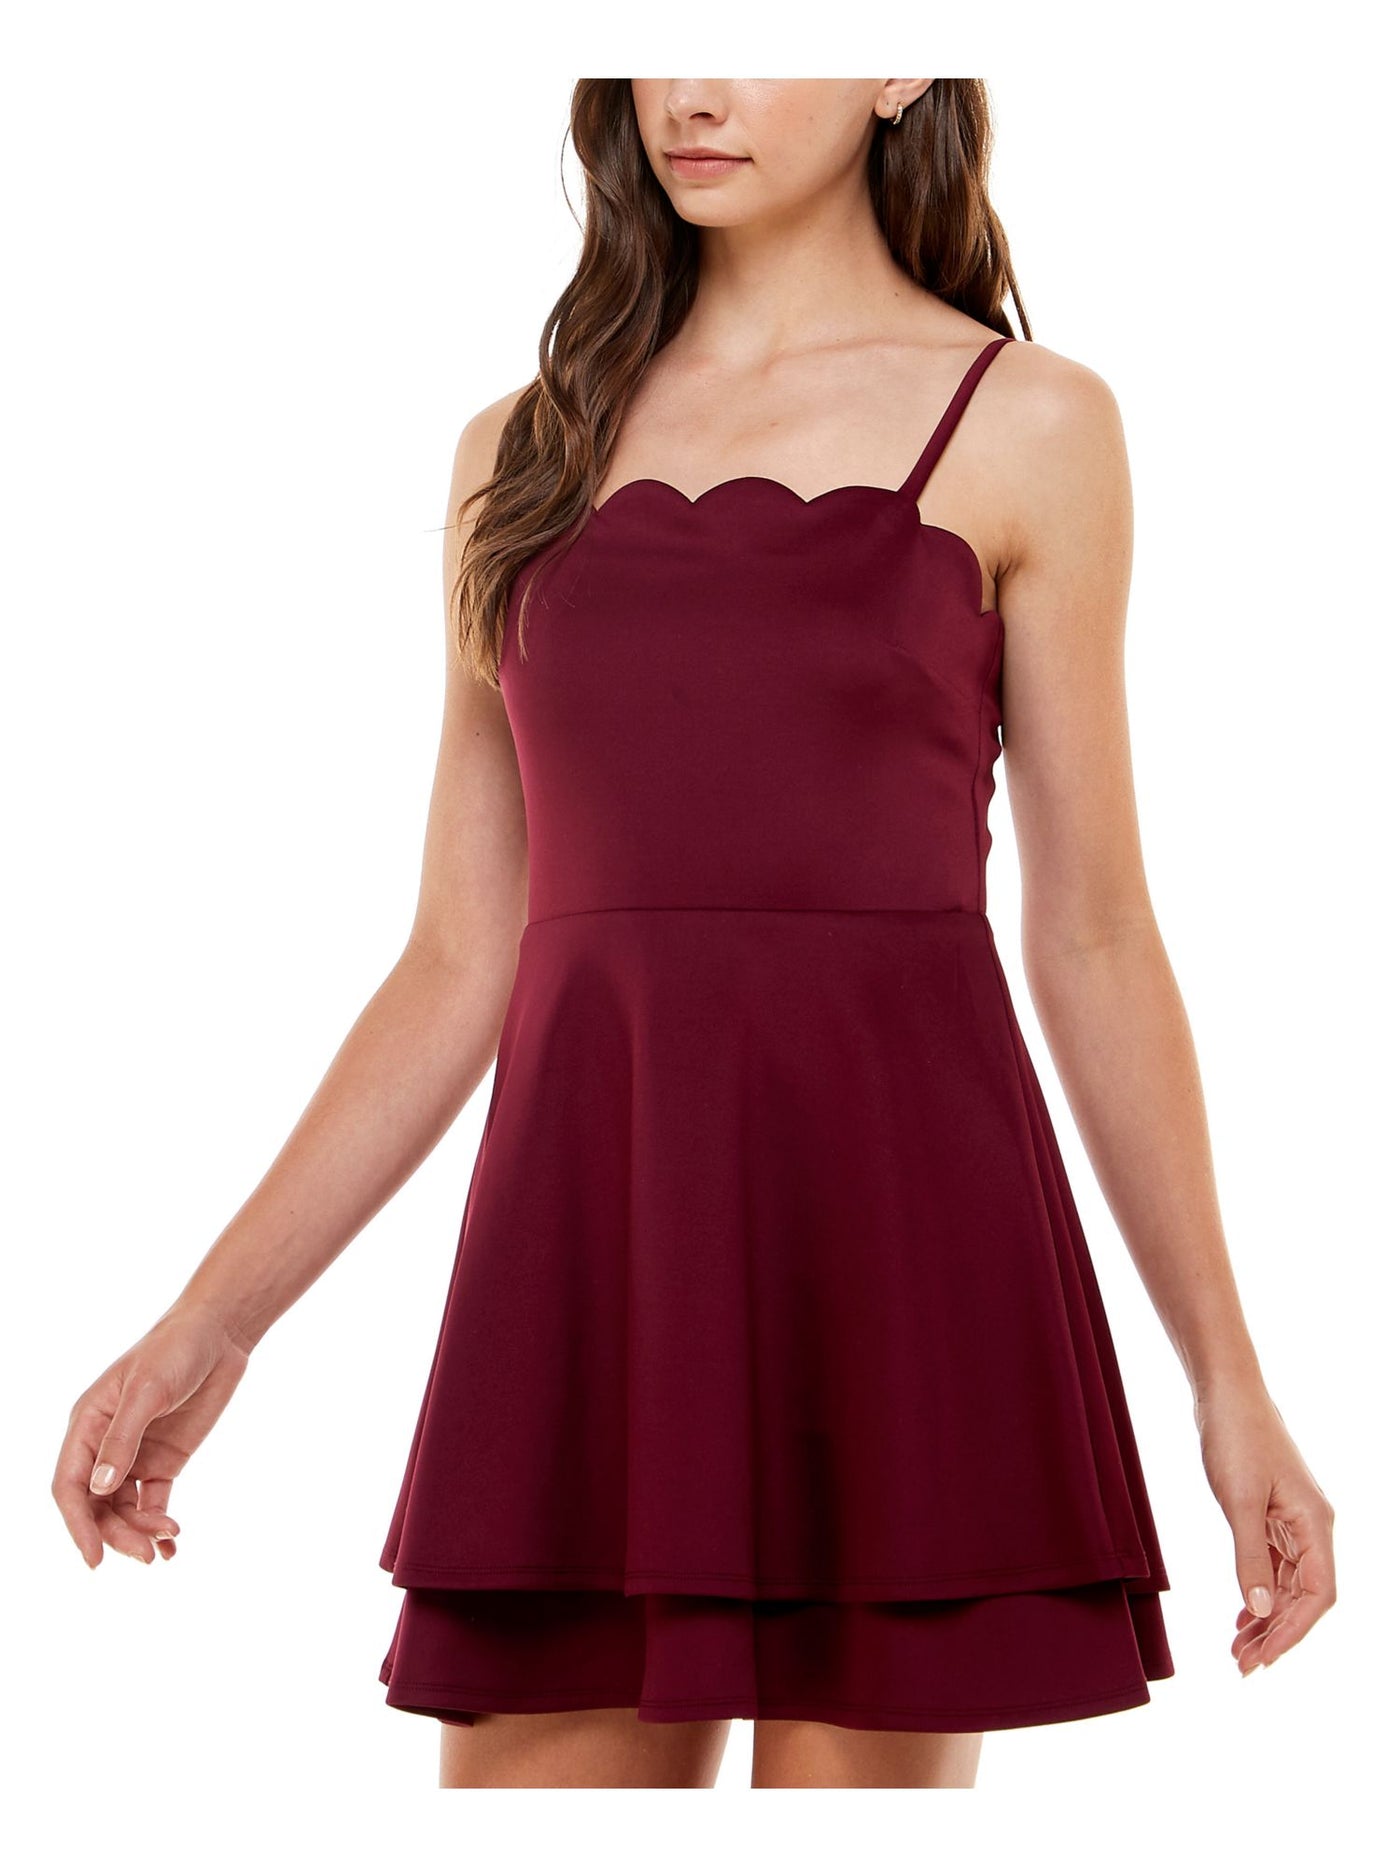 SPEECHLESS Womens Burgundy Zippered Scalloped Spaghetti Strap Square Neck Short Party Fit + Flare Dress Juniors S